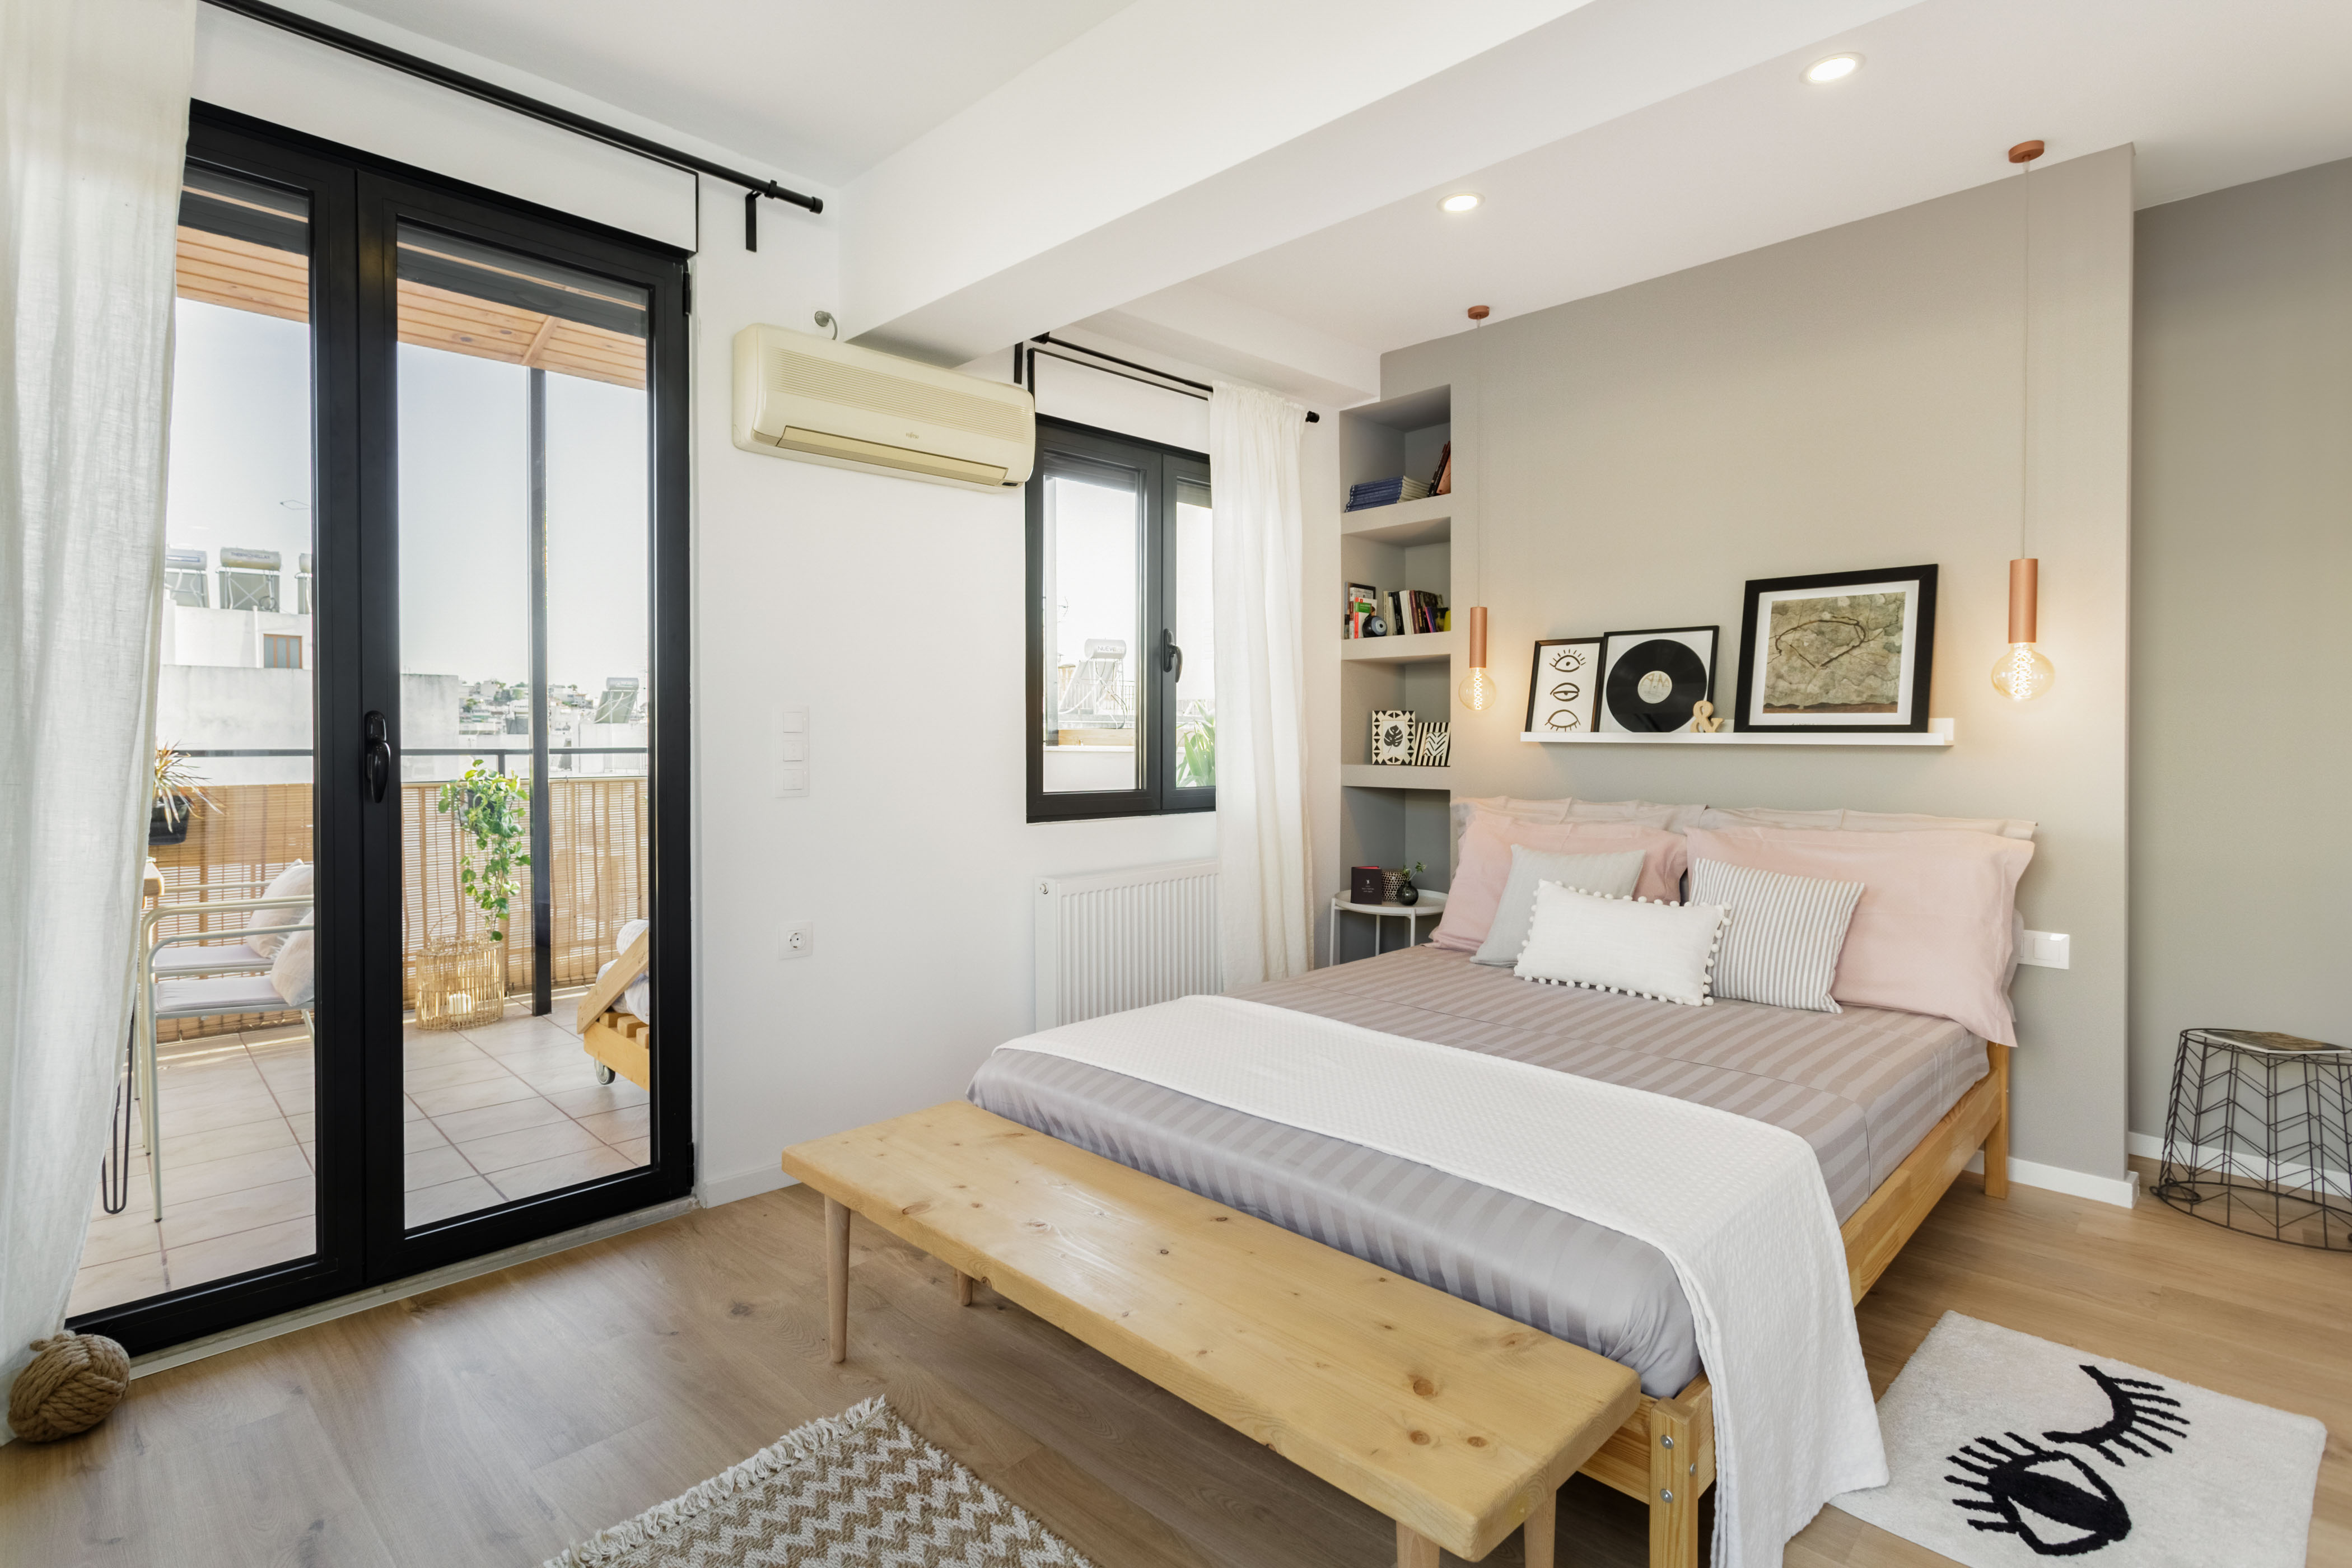 Bedroom with grey walls and light wooden frame near a glass door that leads out to a sunny terrace.